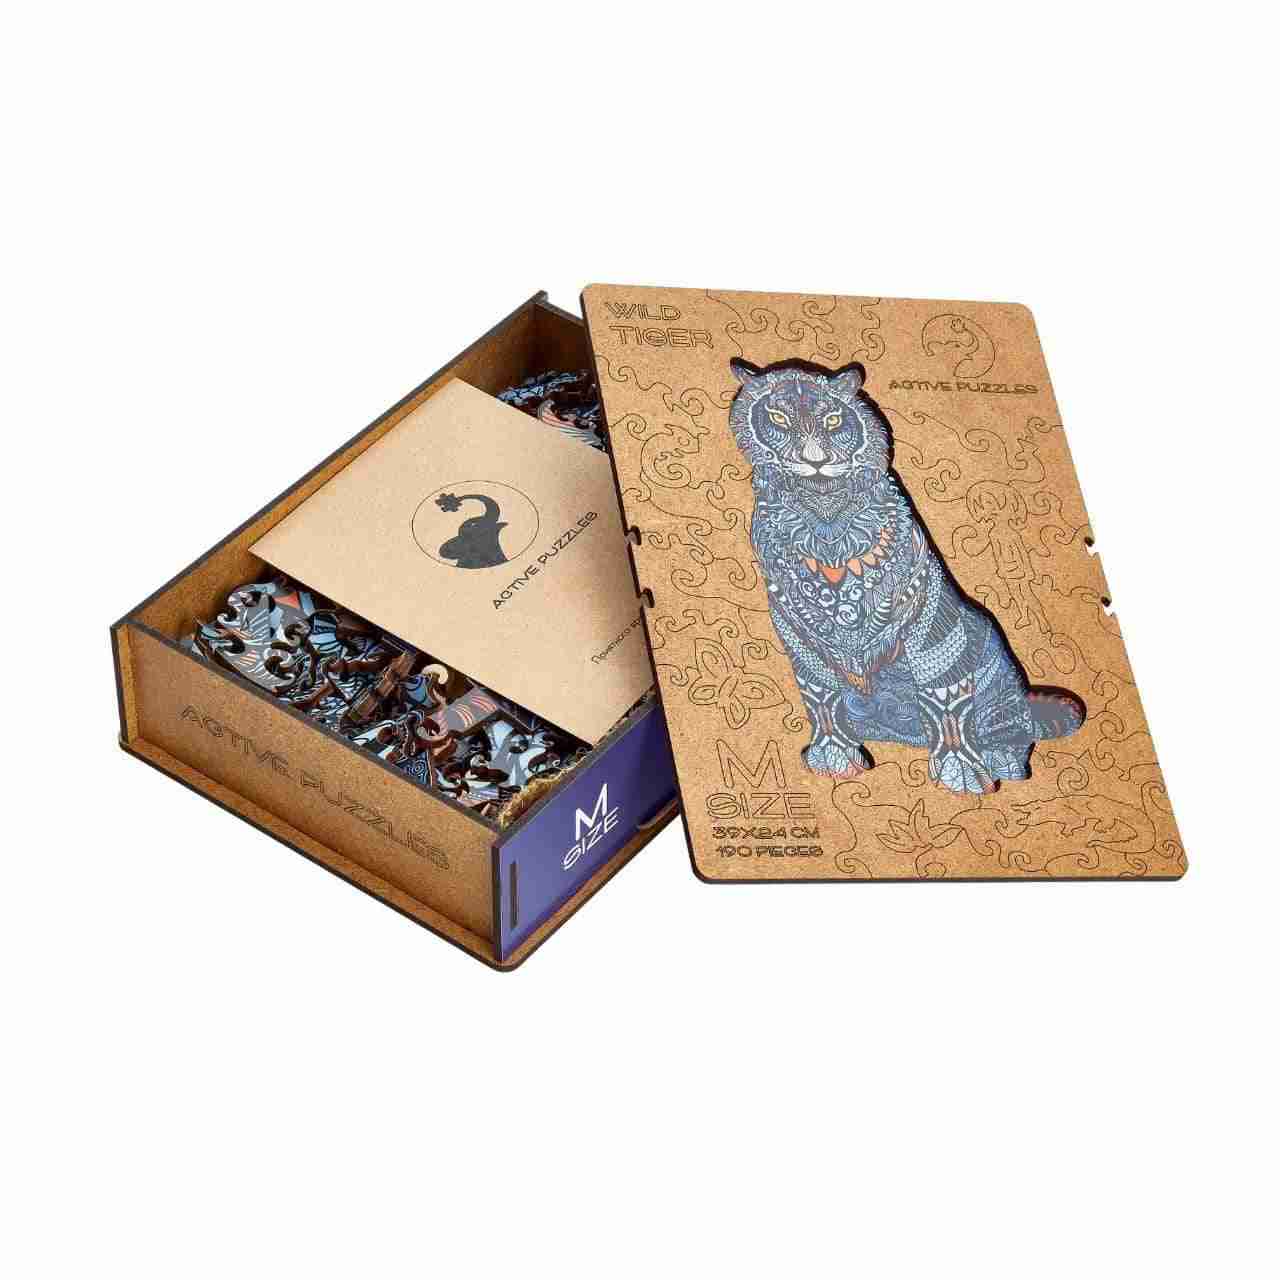 Removable Wooden Puzzles Box